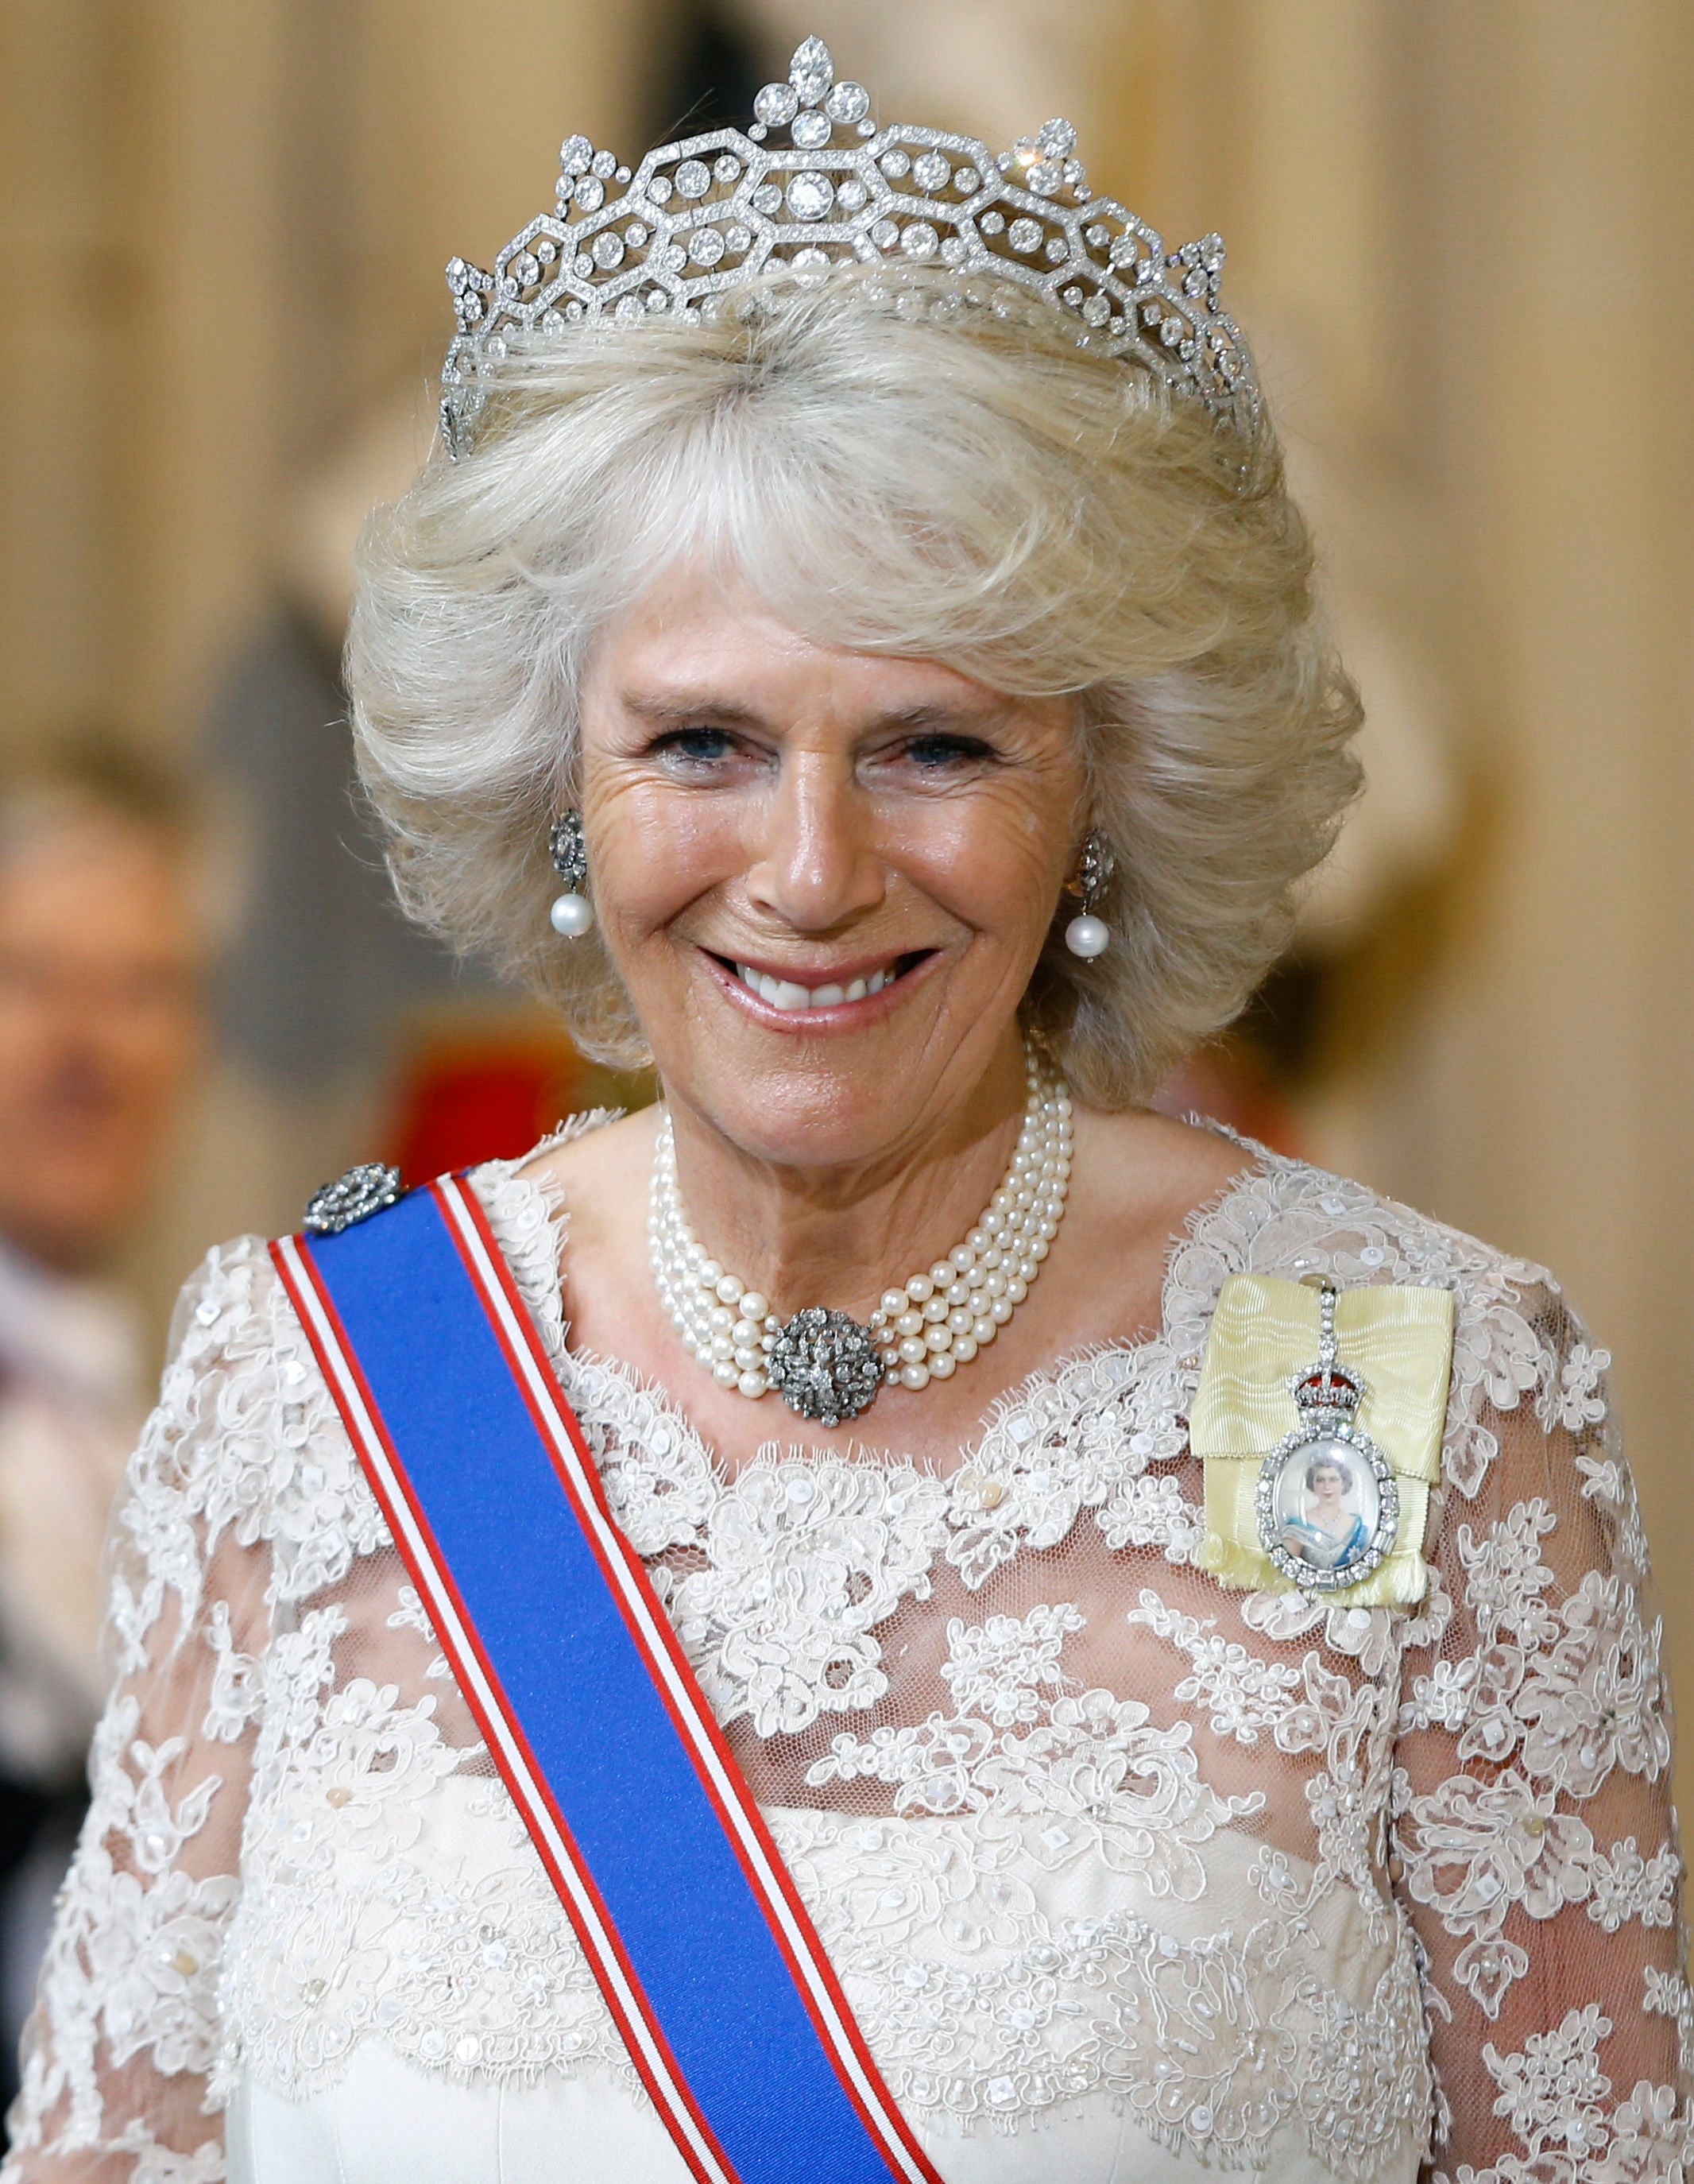 The Duchess of Cornwall at the State Opening of Parliament (Kirsty Wigglesworth/PA)